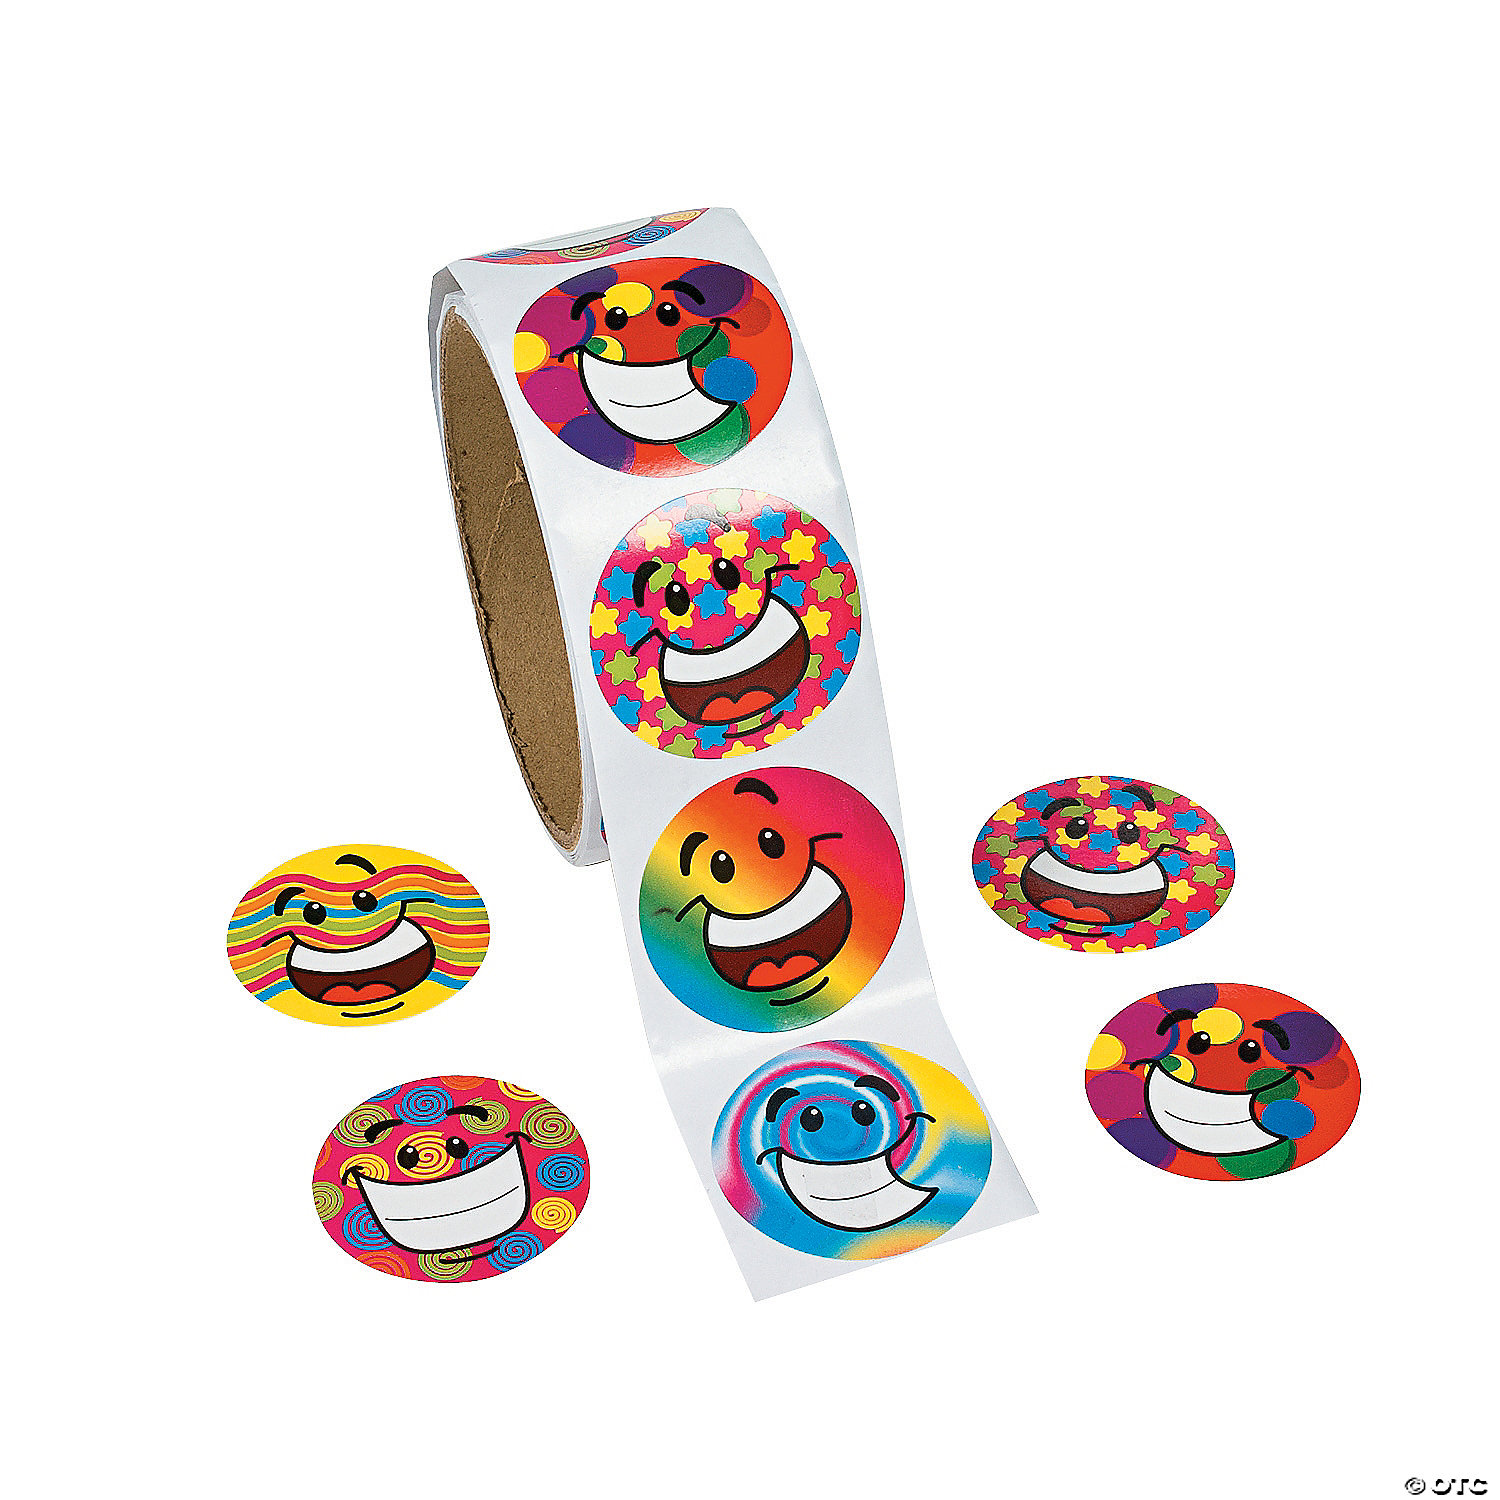 Roll of multi-colored smiley face stickers